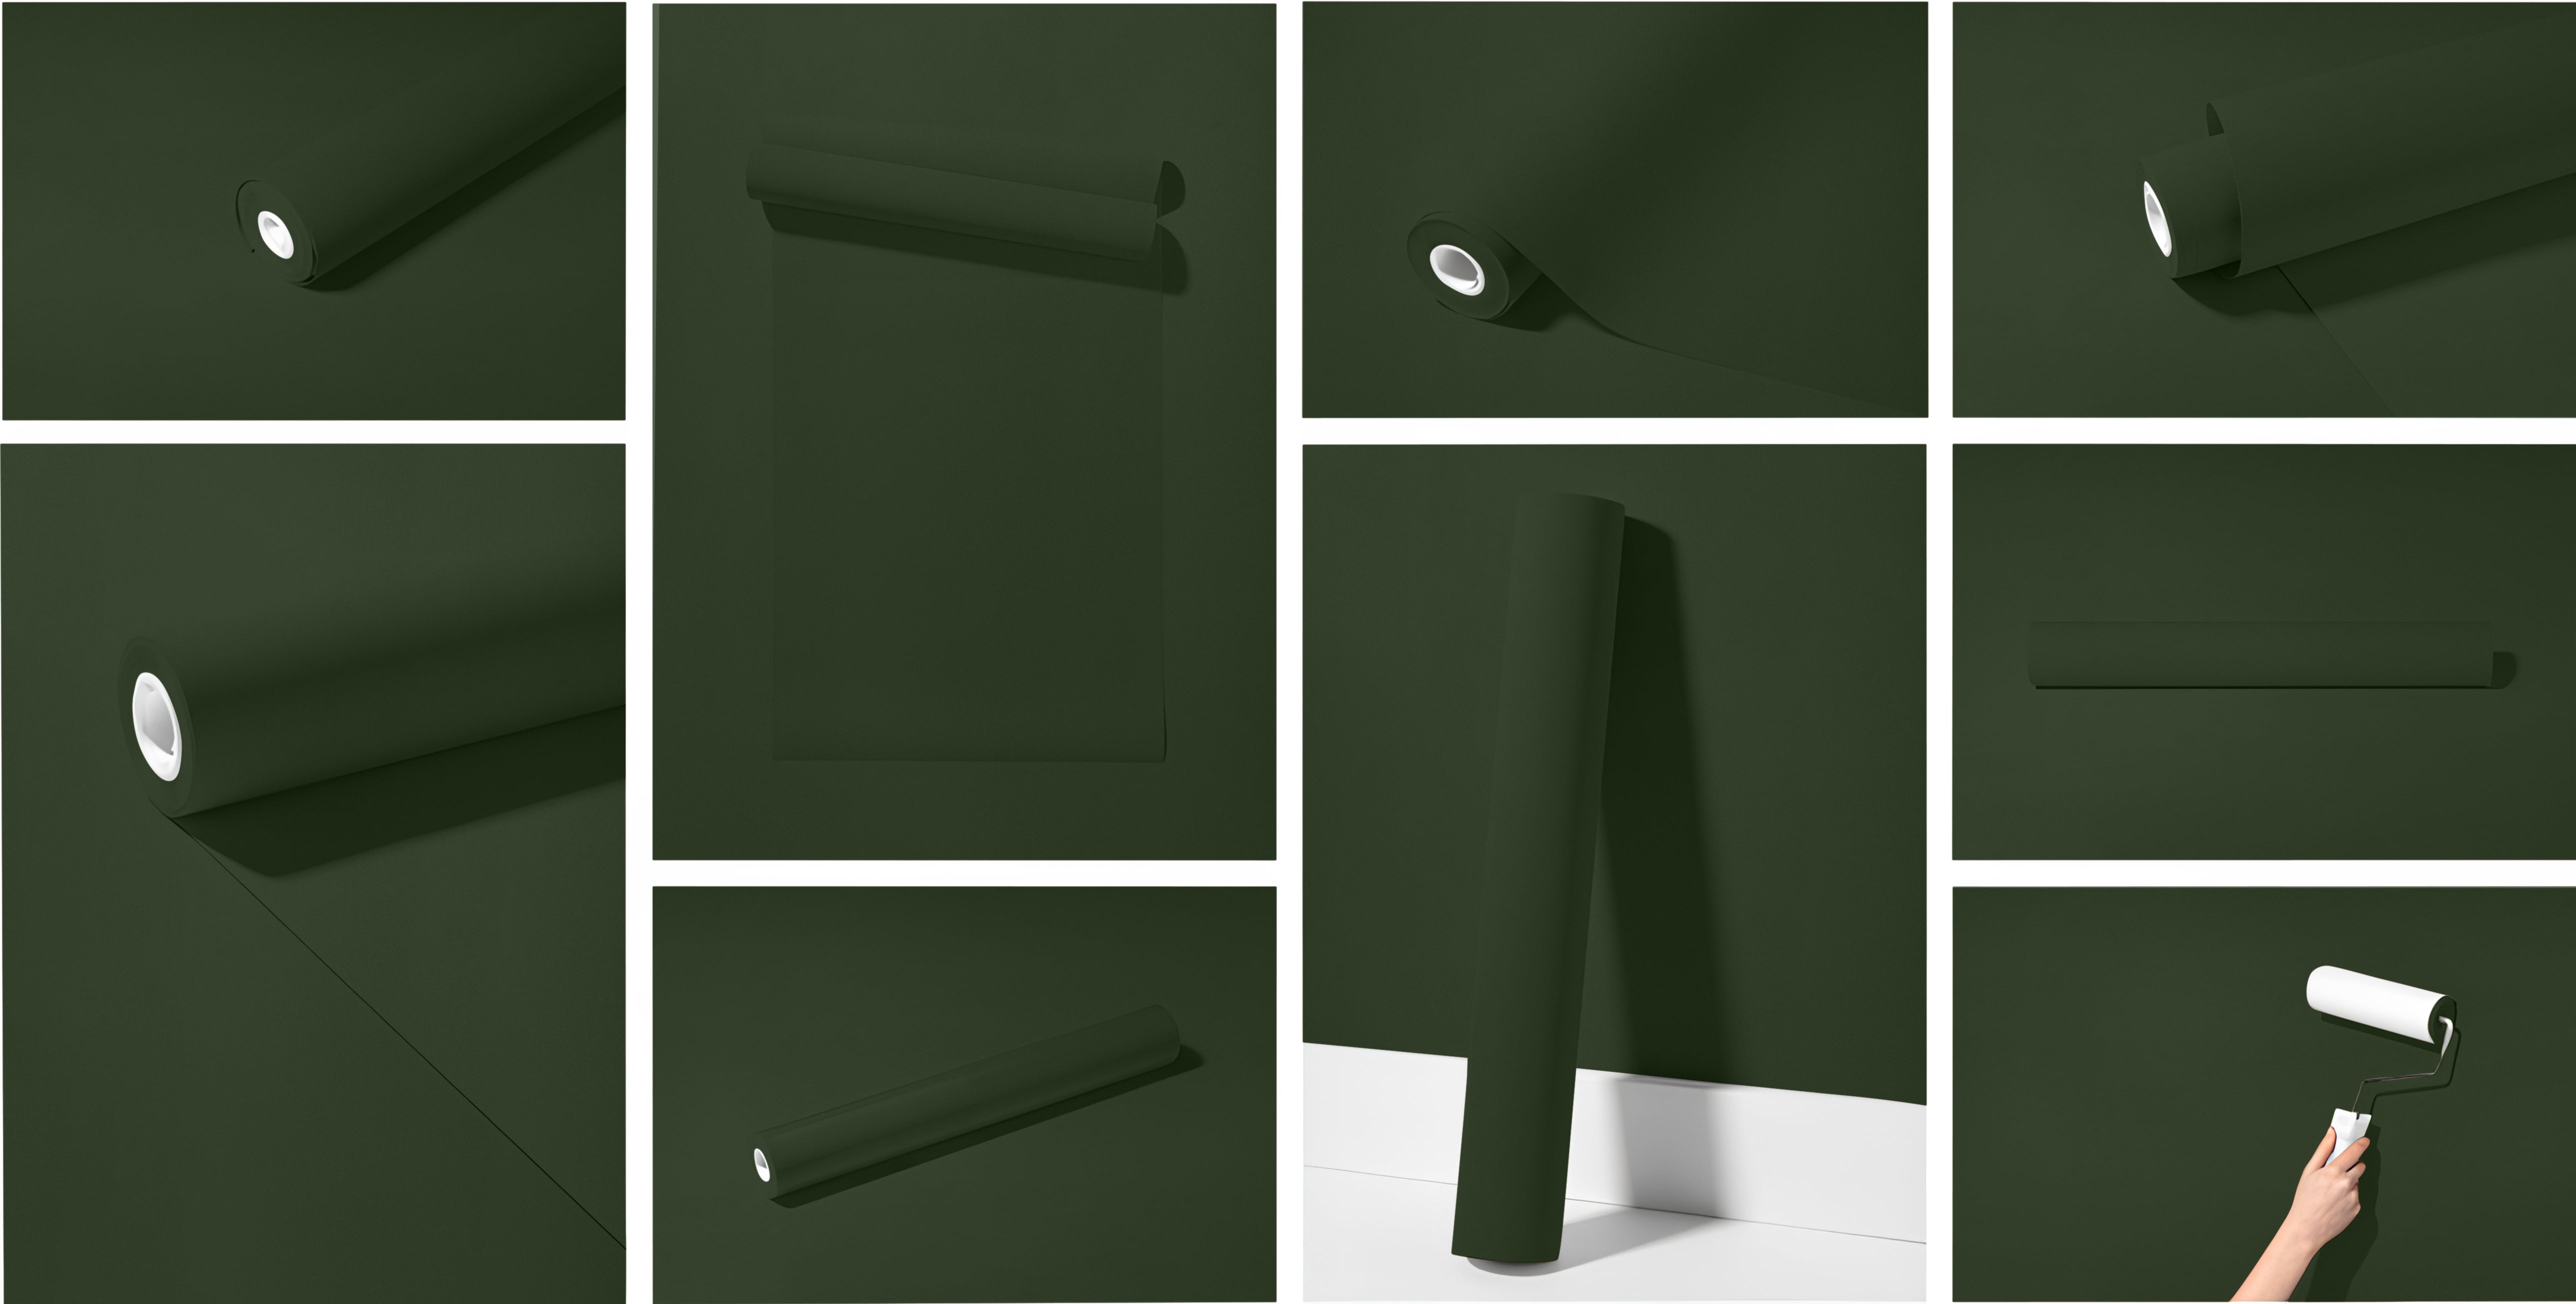 Peel & Stick Removable Re-usable Paint - Color RAL 6020 Chrome Green - offRAL™ - RALRAW LLC, USA